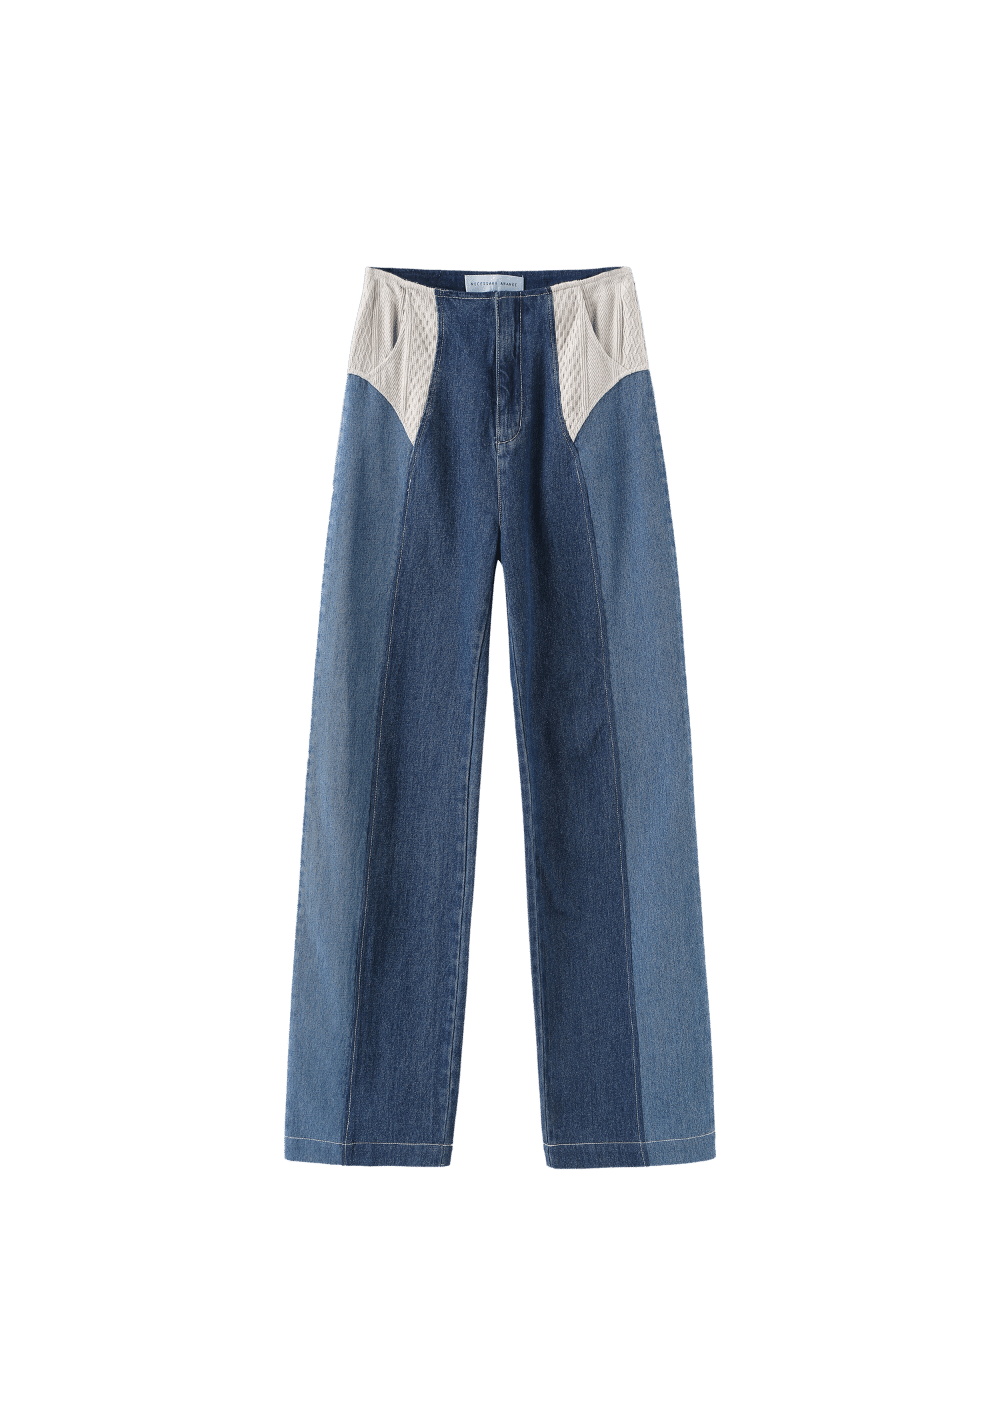 Patchwork High Waisted Jeans - PSYLOS 1, Patchwork High Waisted Jeans, Pants, Necessary, PSYLOS 1